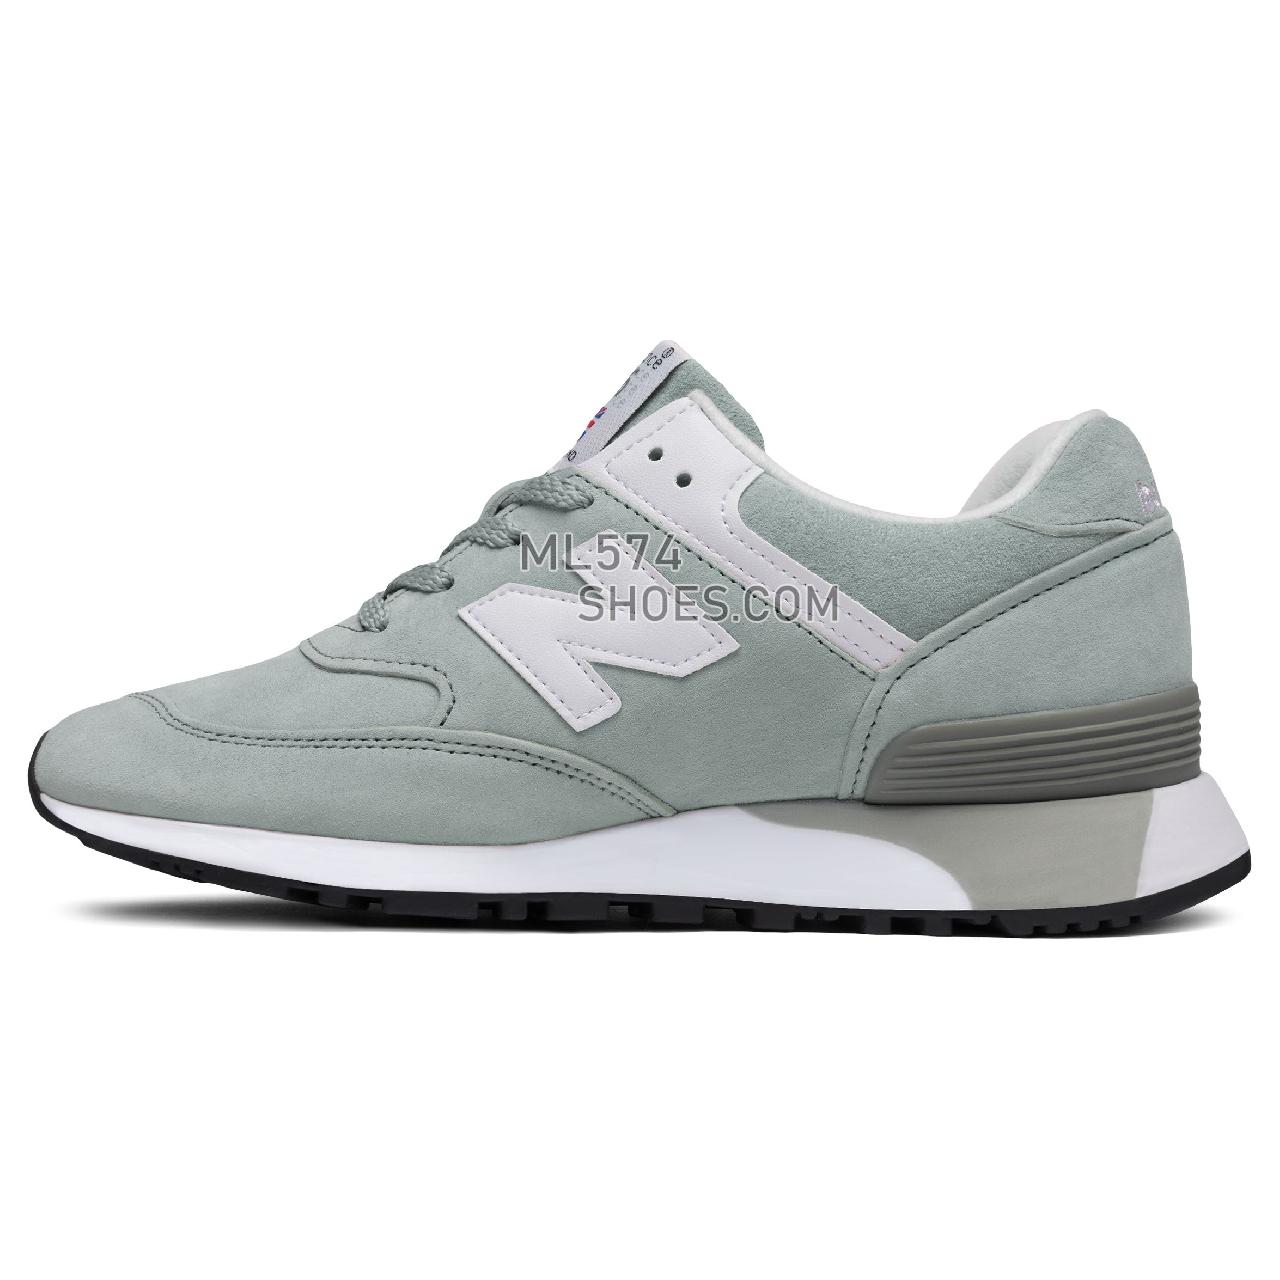 New Balance 576 Made in UK - Men's 576 Made in UK Classic W576-PS3 - Slate with White - W576PG